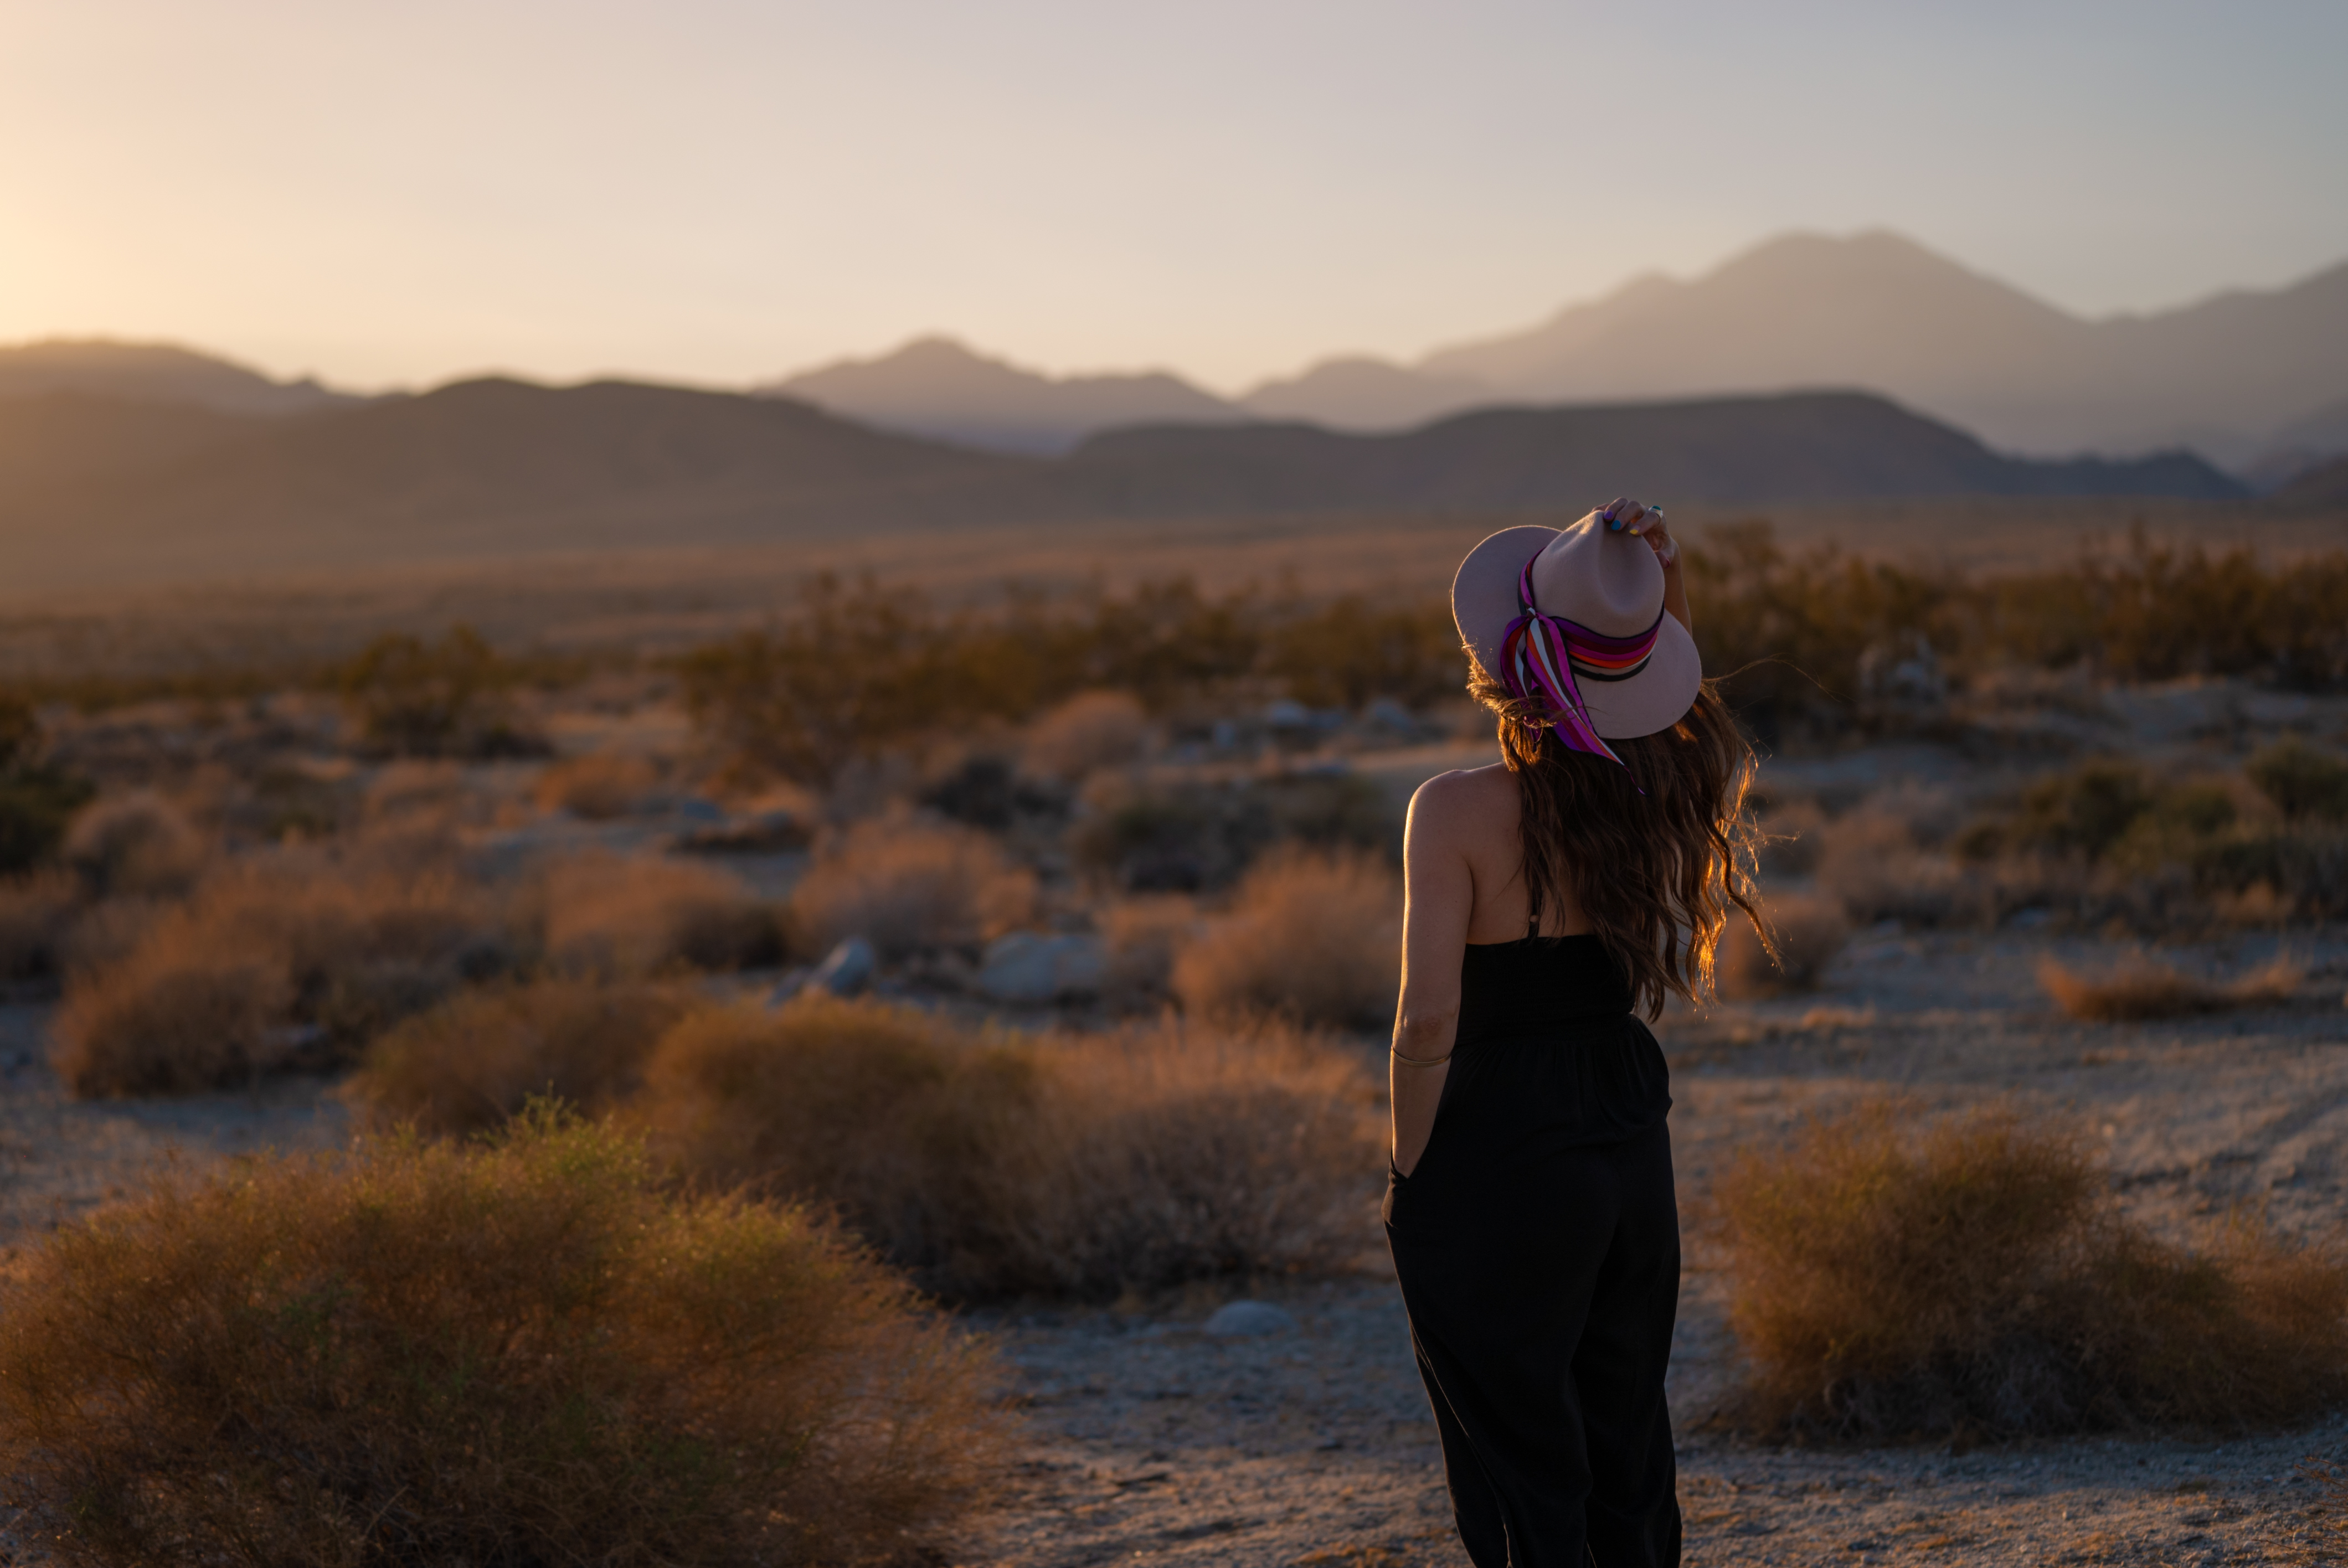 Anndee gazing at the sunset in the desert, surrounded by mountains.